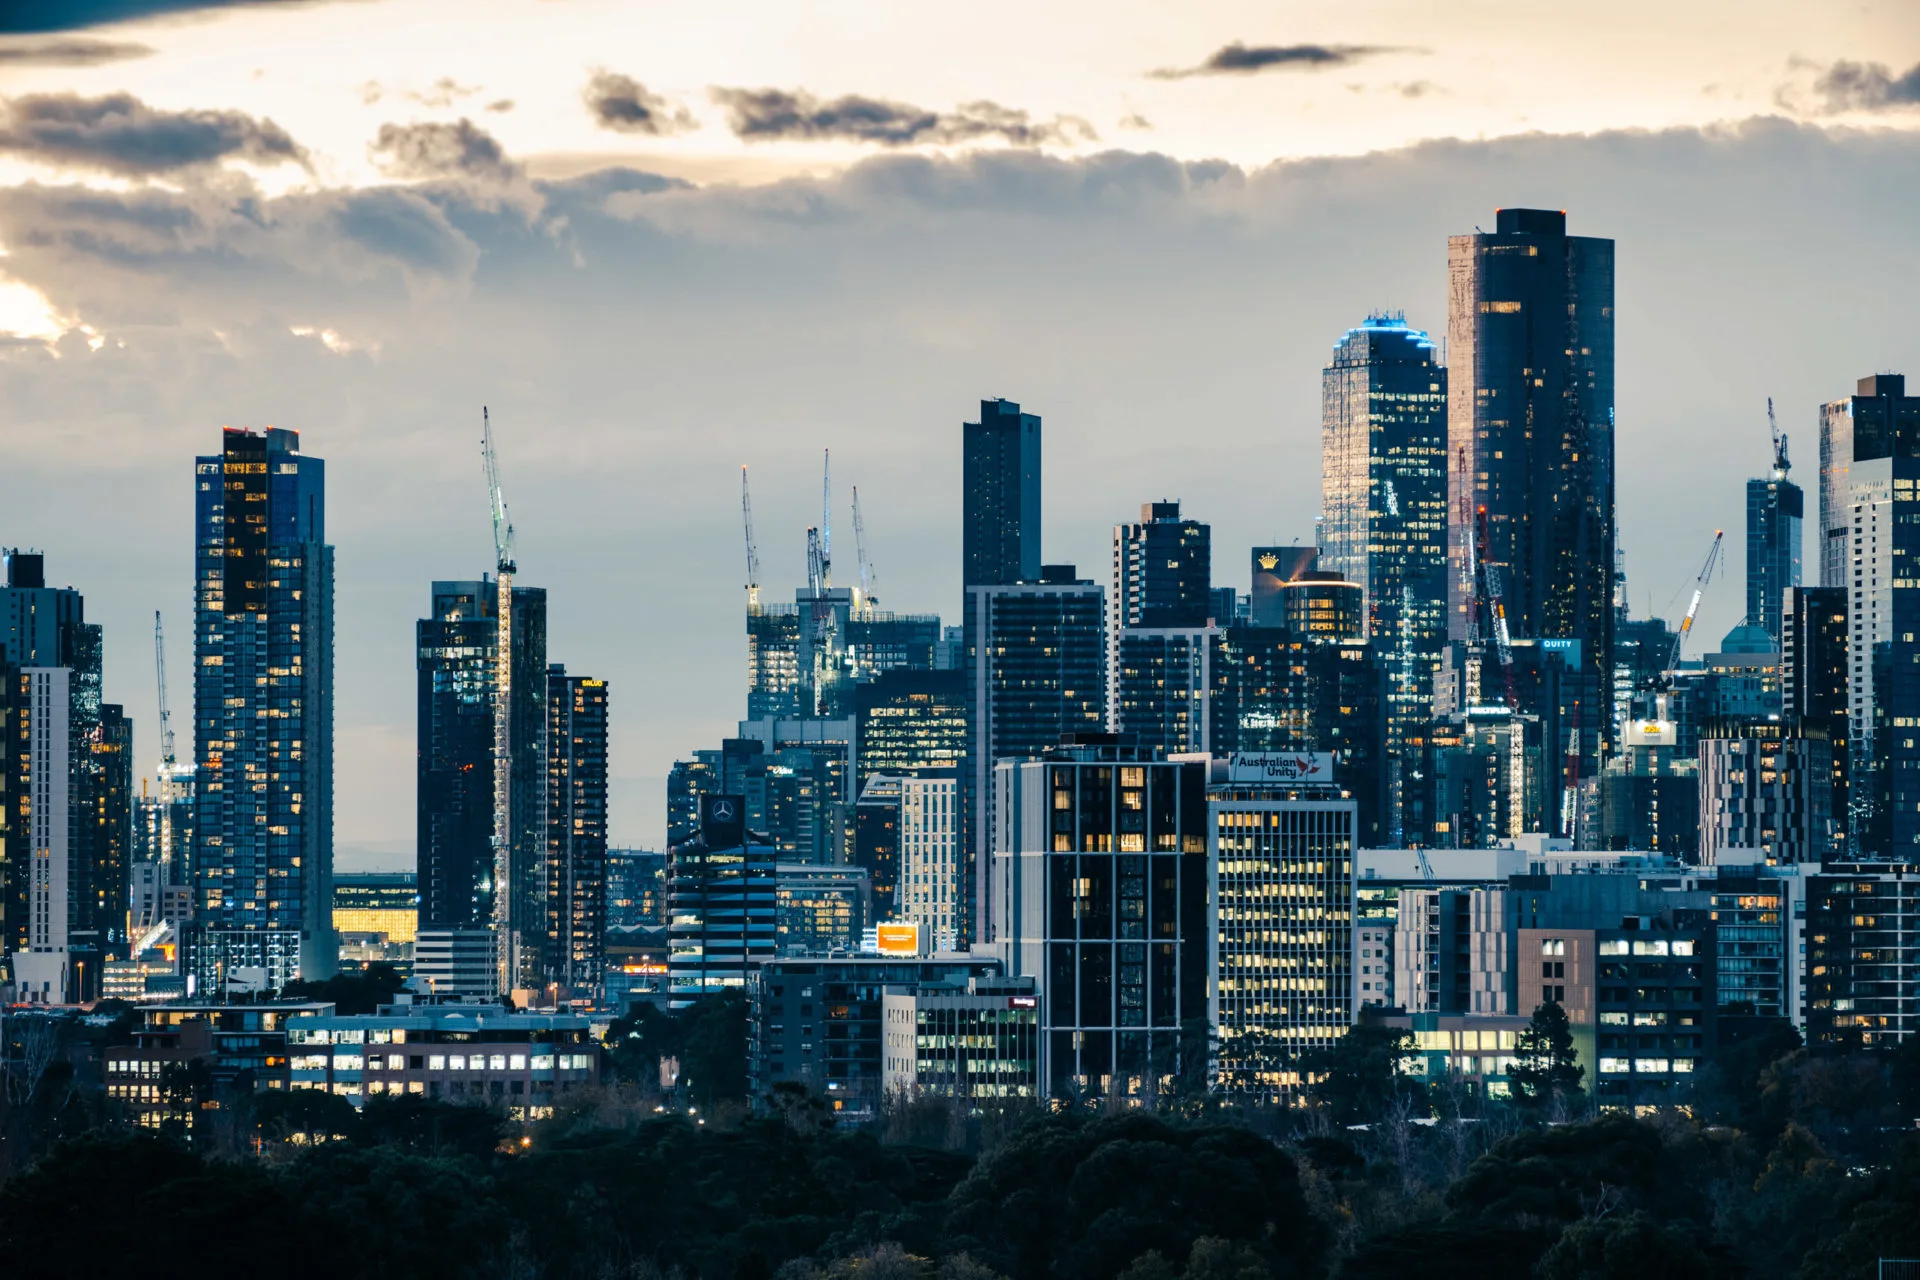 View-Hotels-Melbourne-Contact-1920x1280